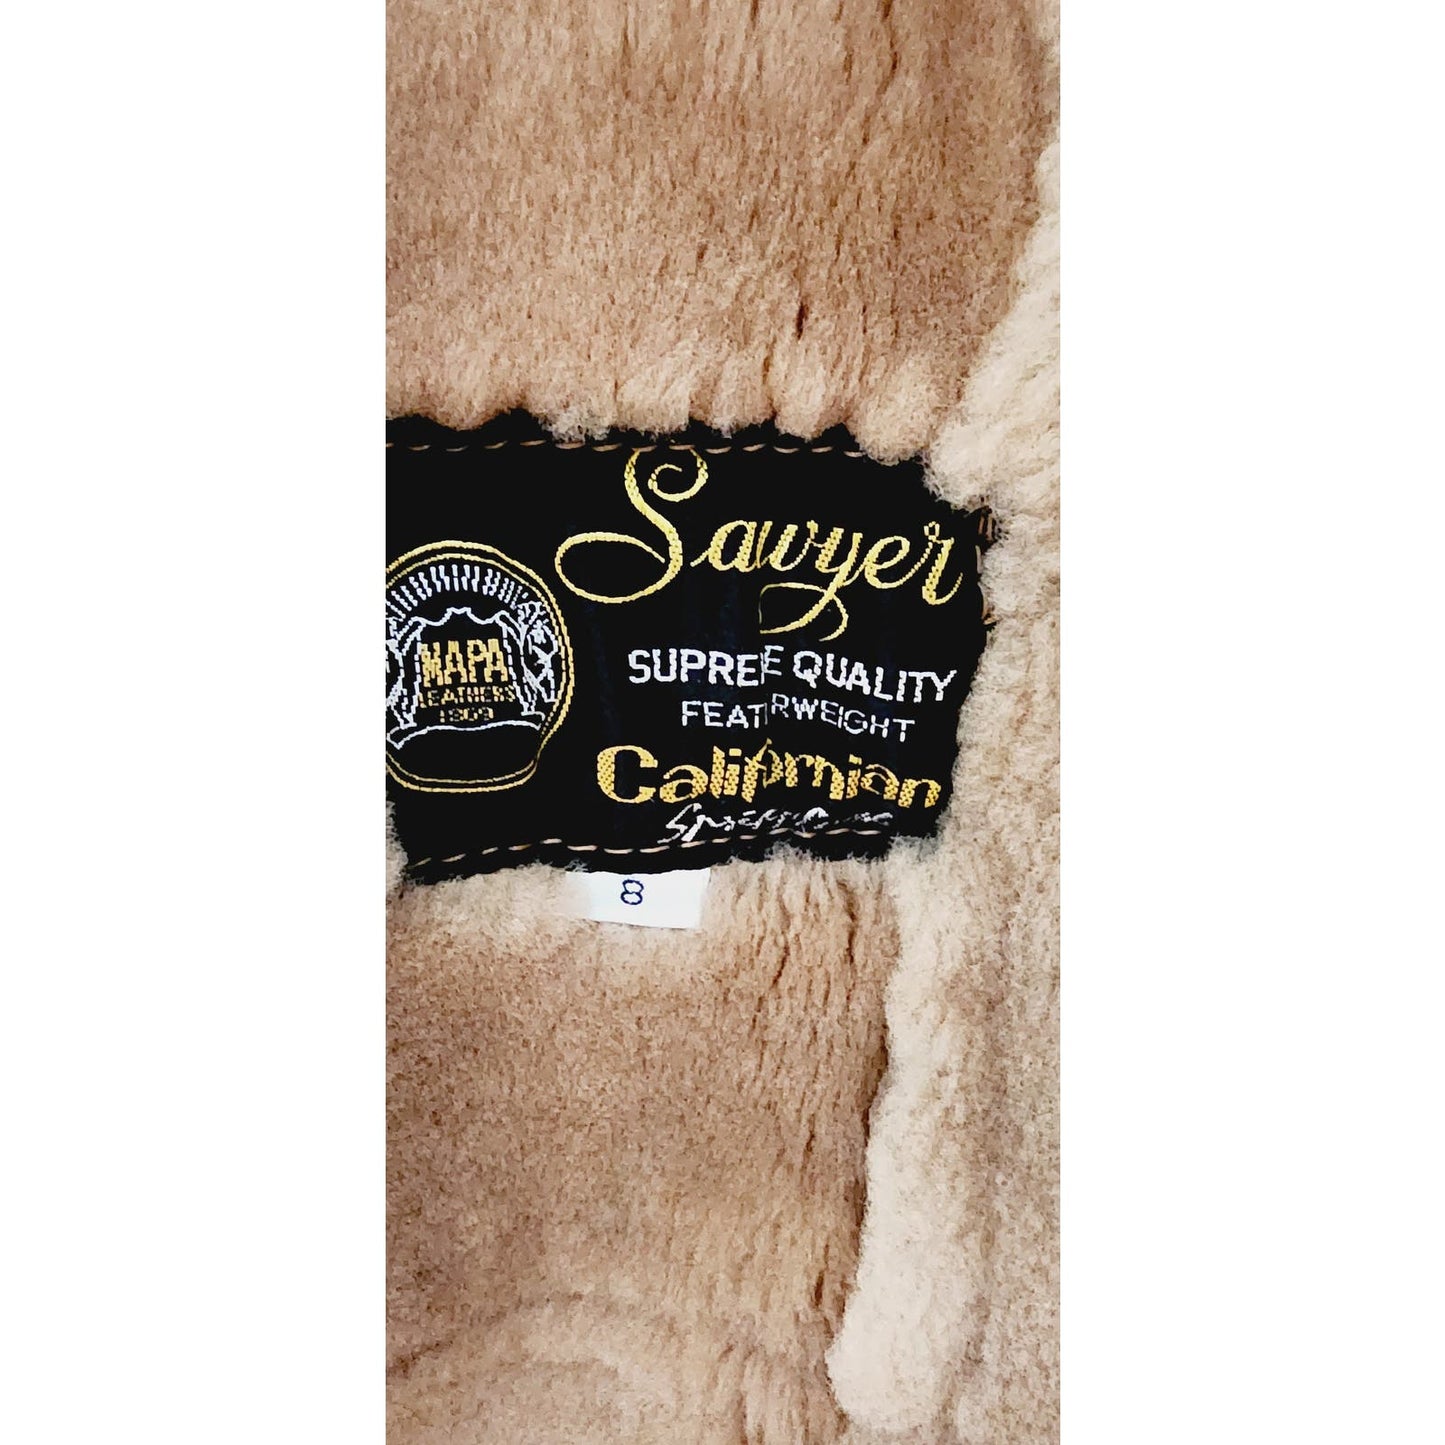 70s Brown Suede Afghan Coat Shearling Collar Cuffs & Lining - Sawyer by Napa Small